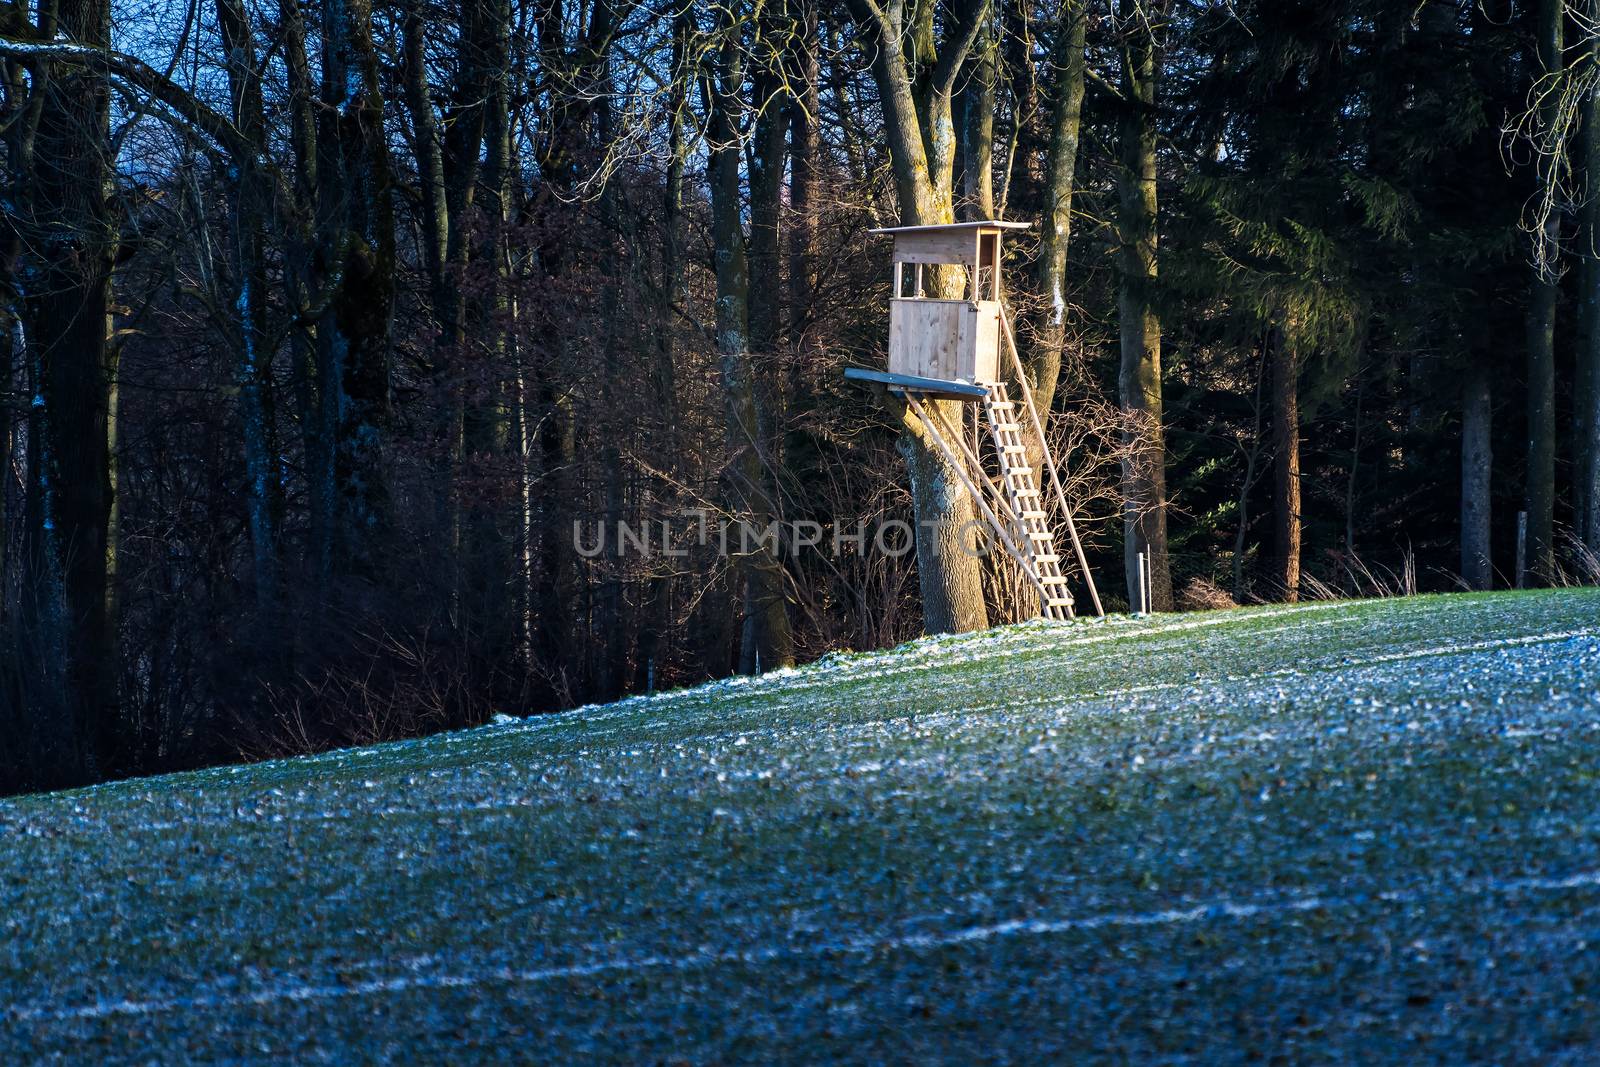 Deerstand with field and forest in Bavaria, Germany in winter